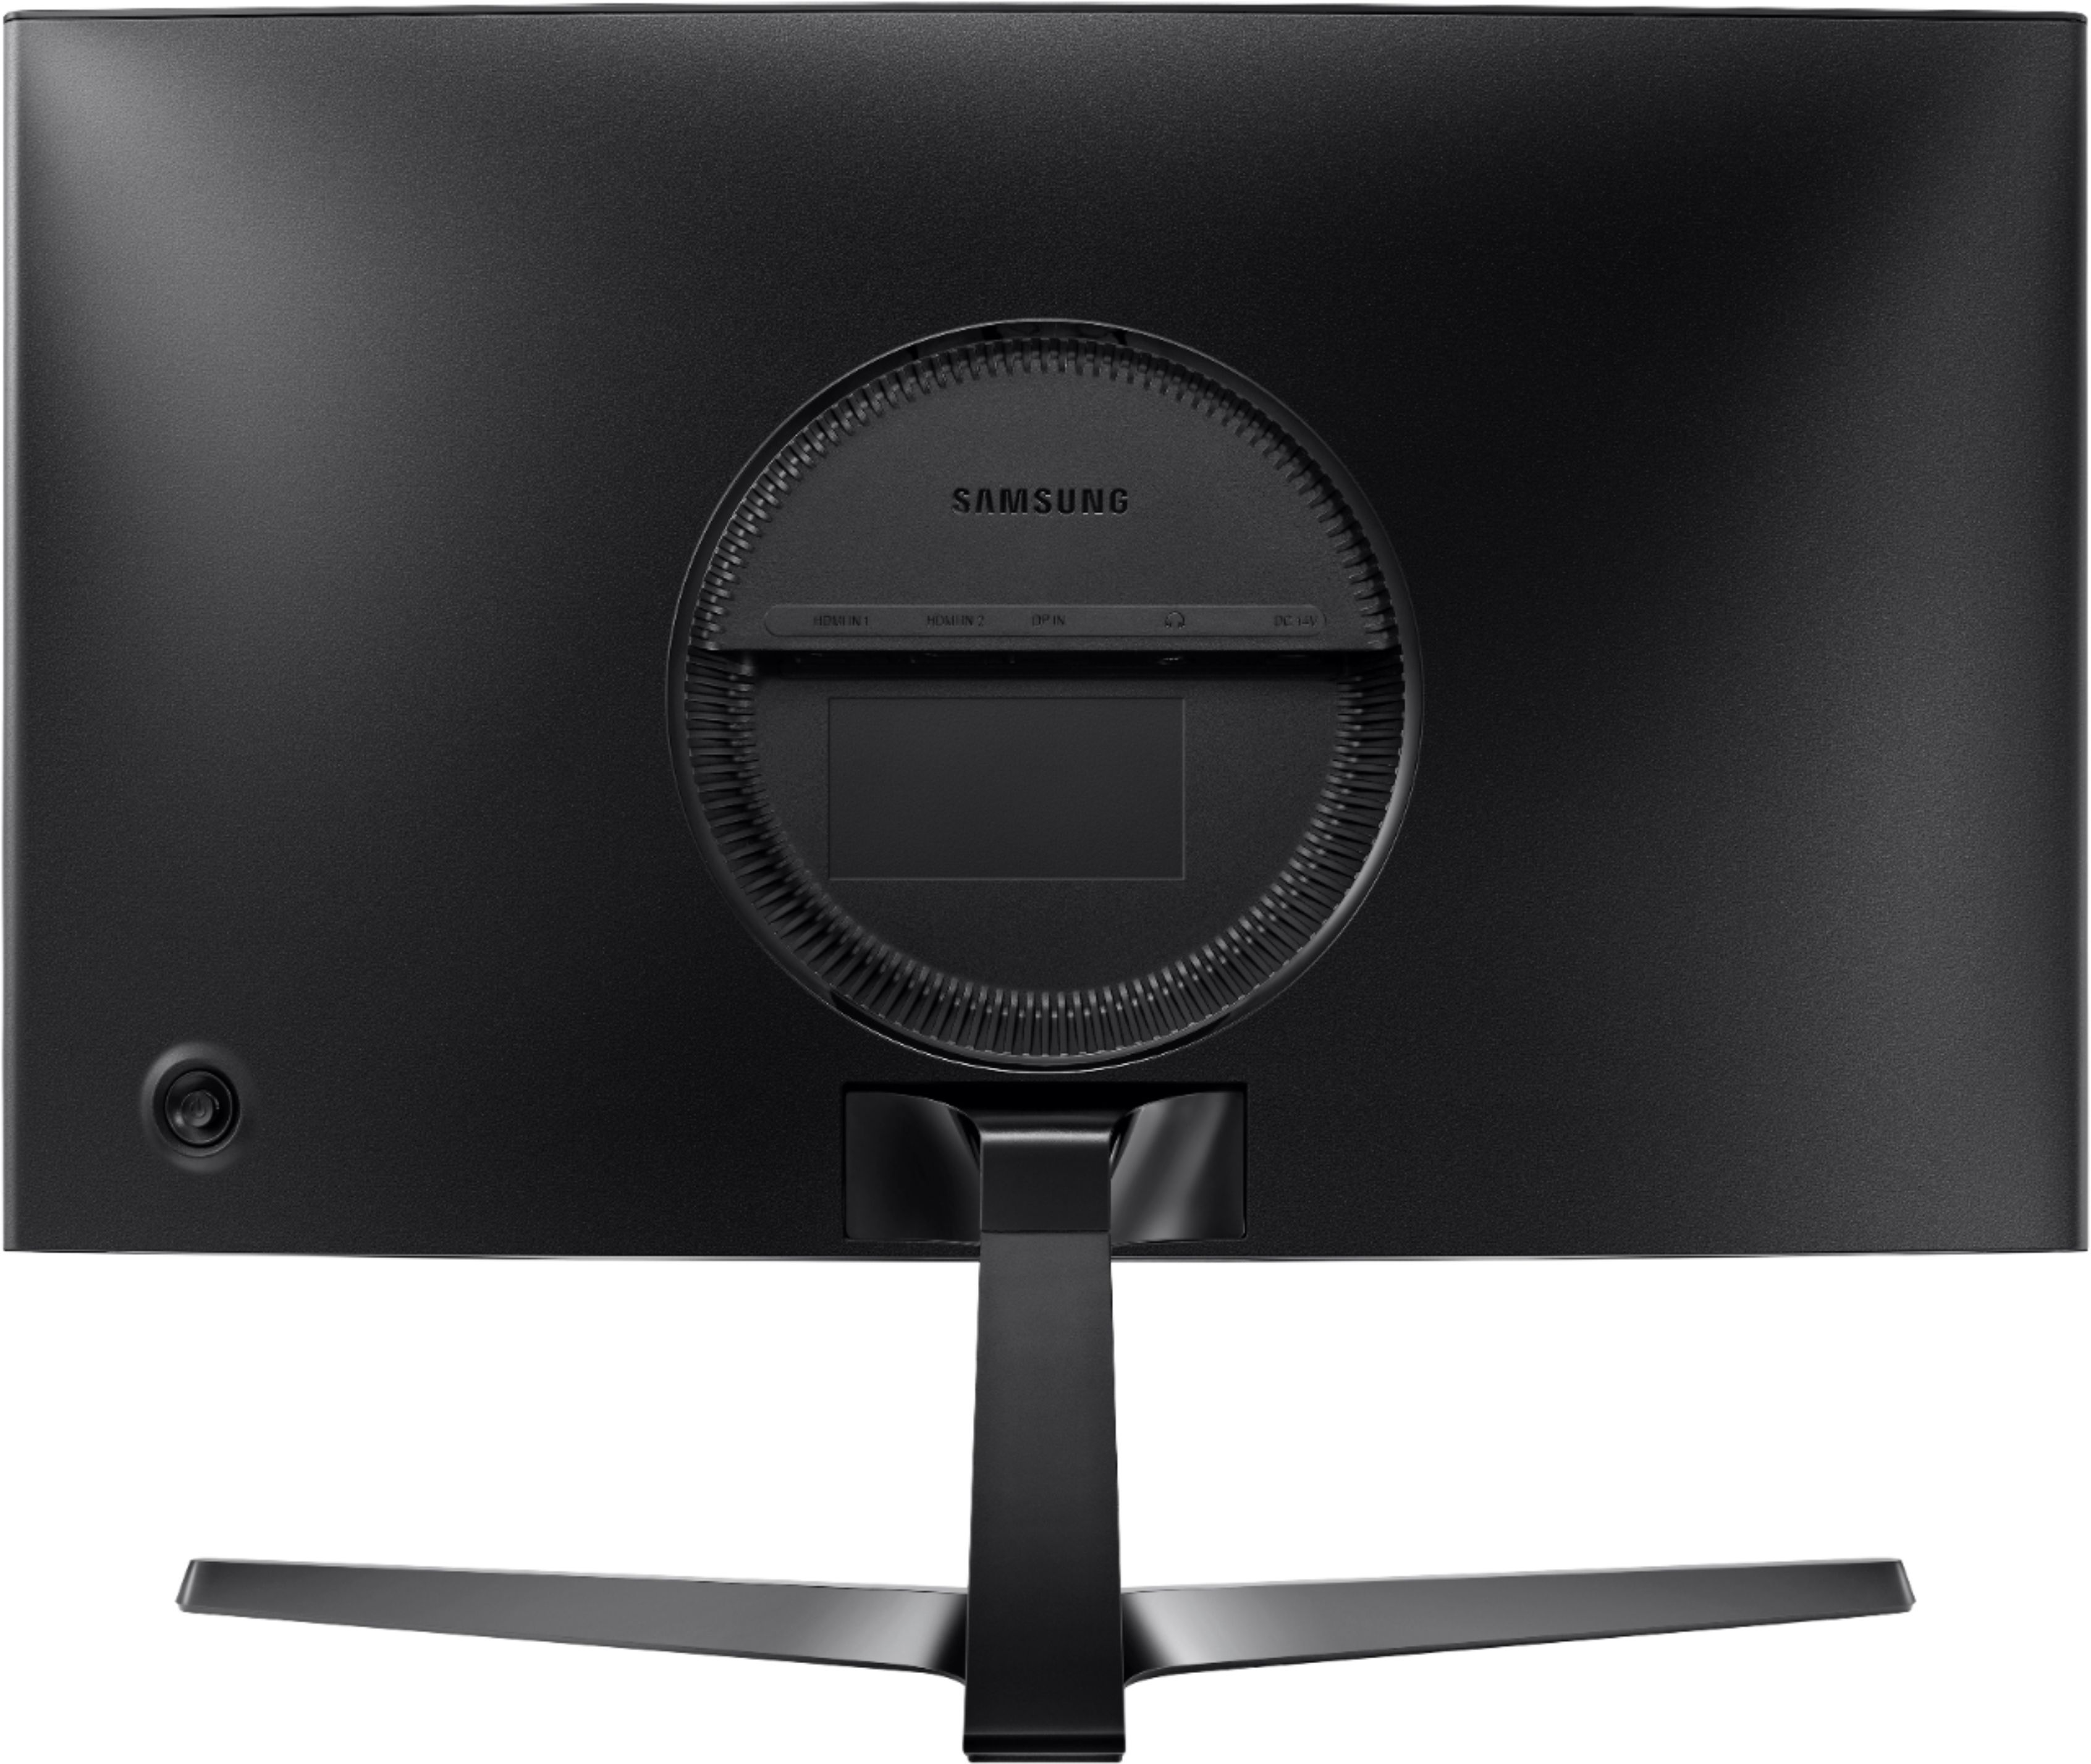 Back View: Samsung - A400 Series 24" IPS LED FHD FreeSync Monitor with Webcam - Black